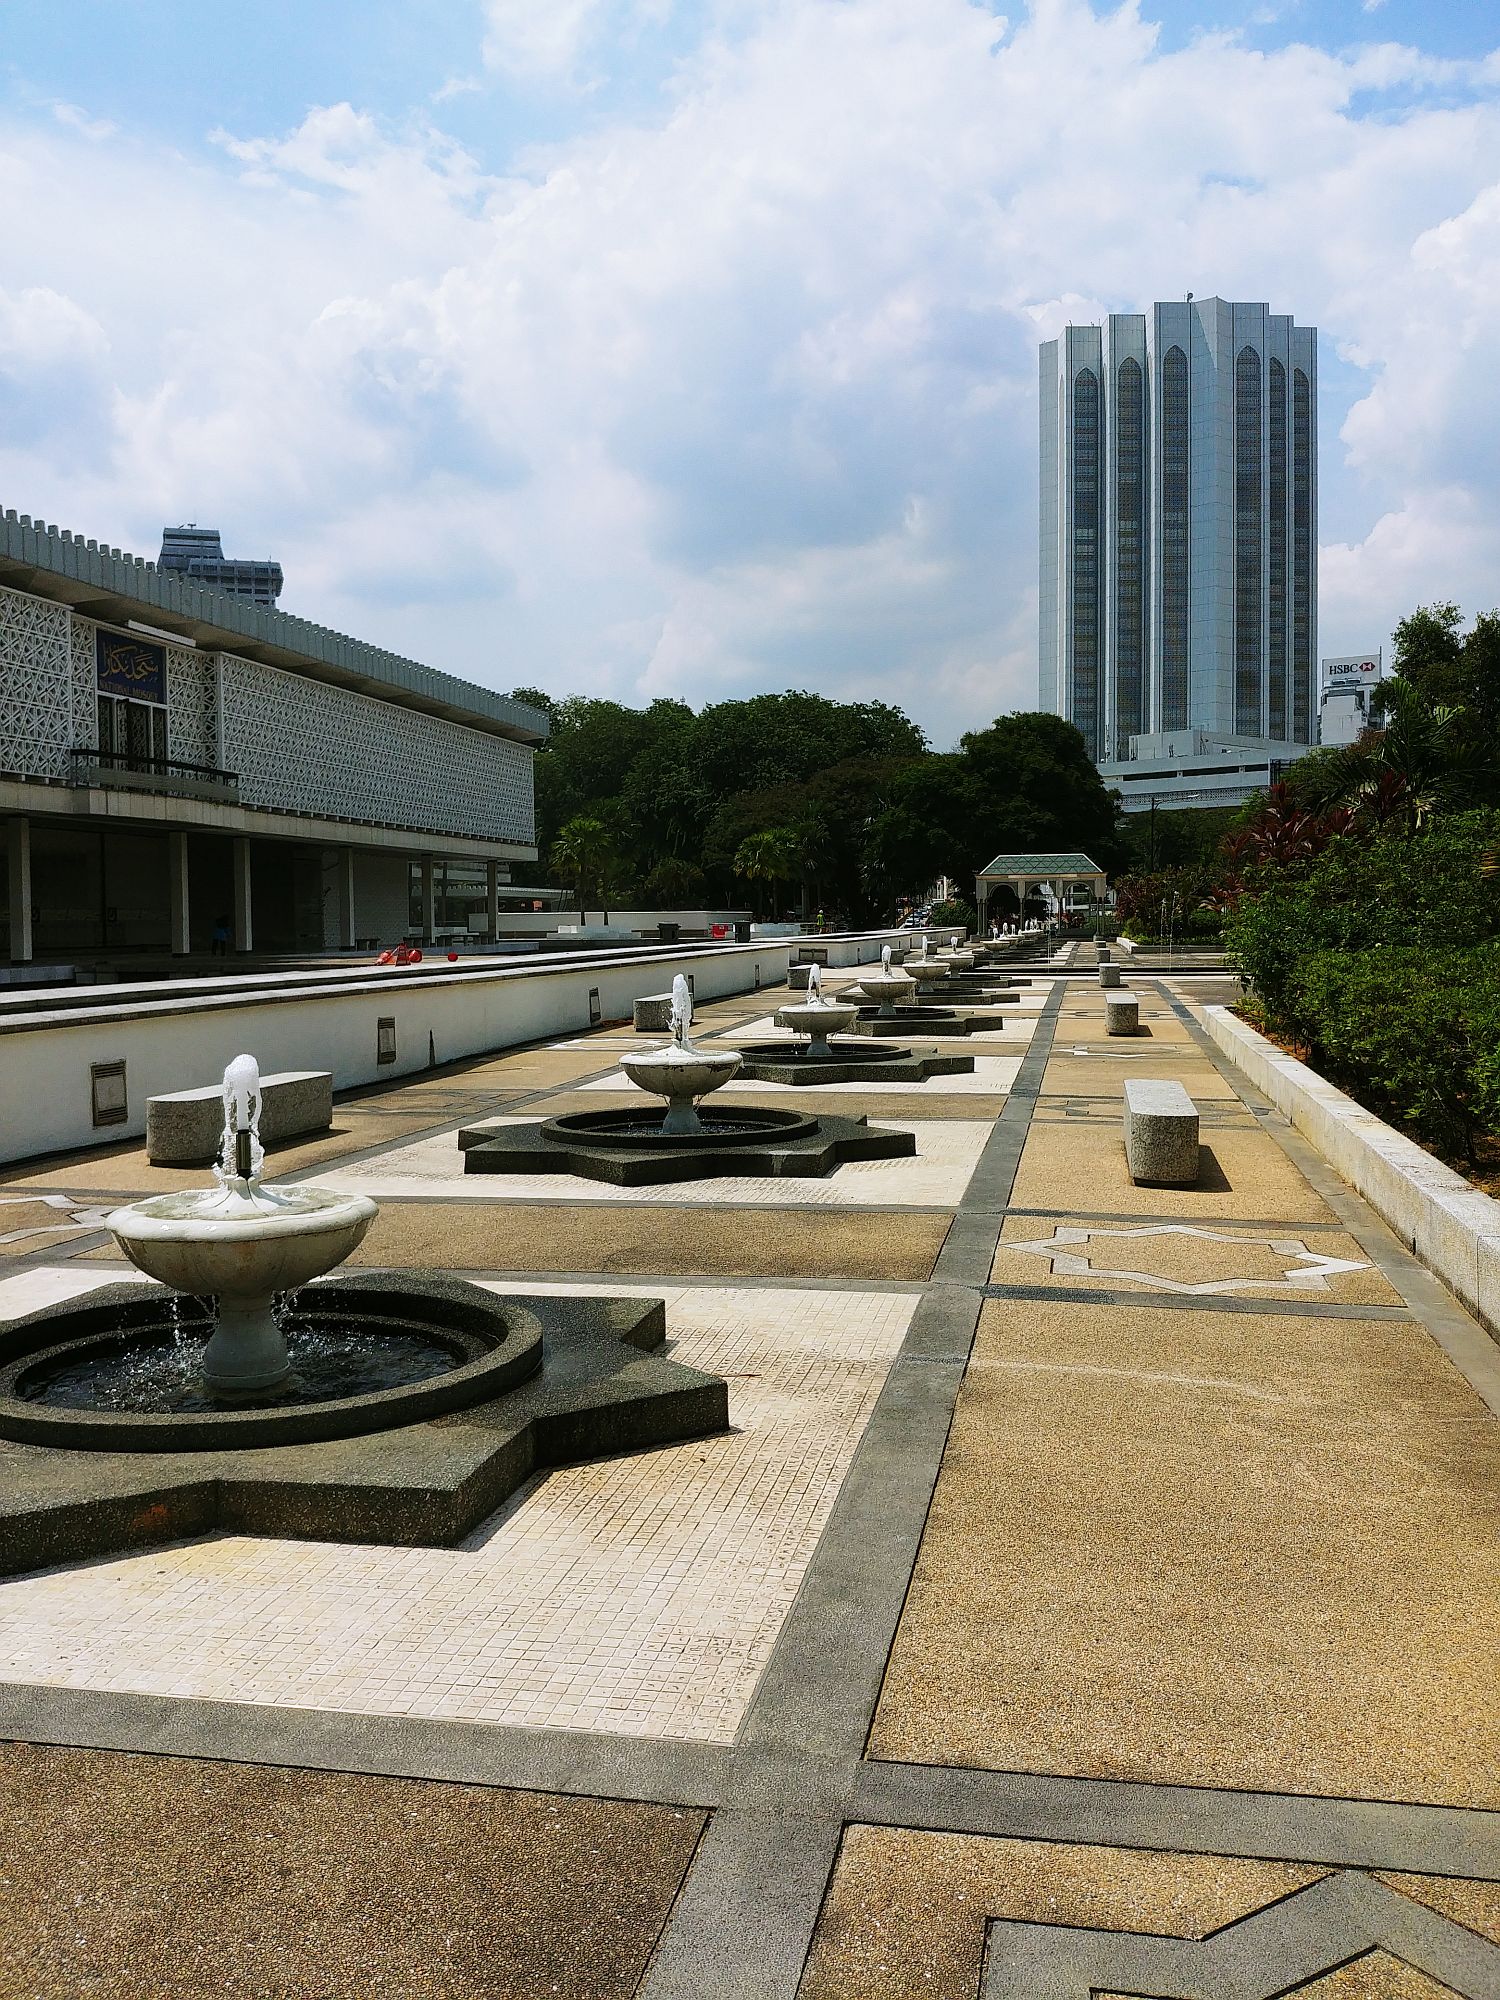 KL - National Mosque - Fountains